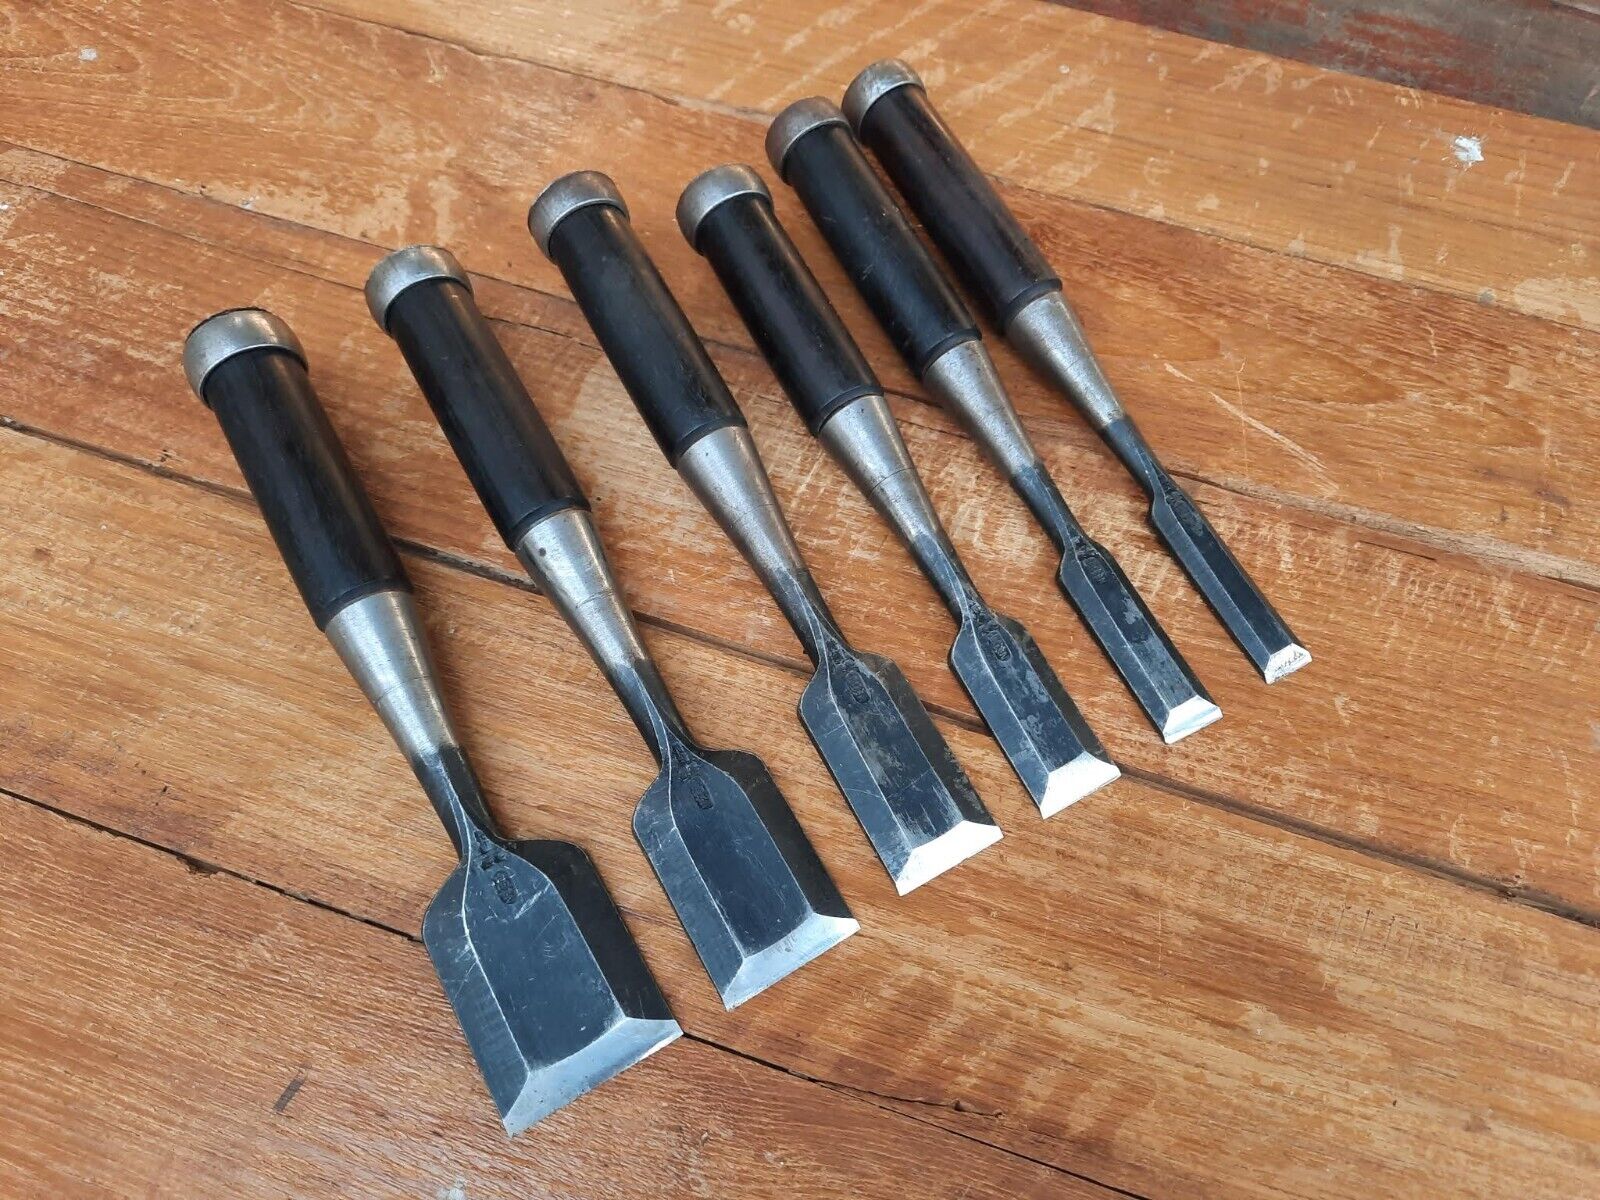 Lot of 6 Vintage Japanese  Bevel Edge Chisels Rosewood handle Woodworking Tools